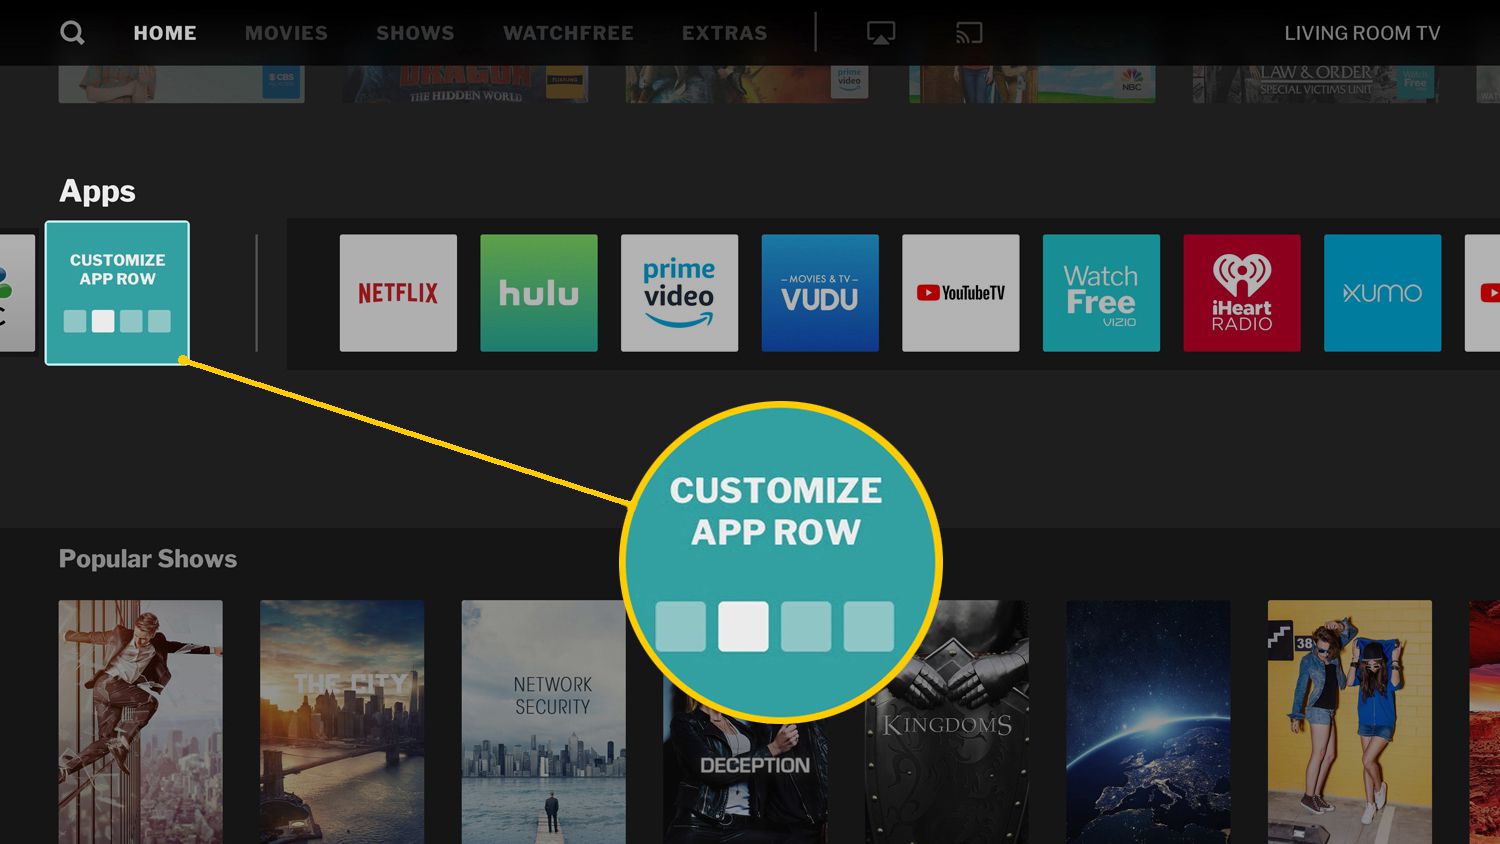 How to Add Apps to Your Vizio Smart TV